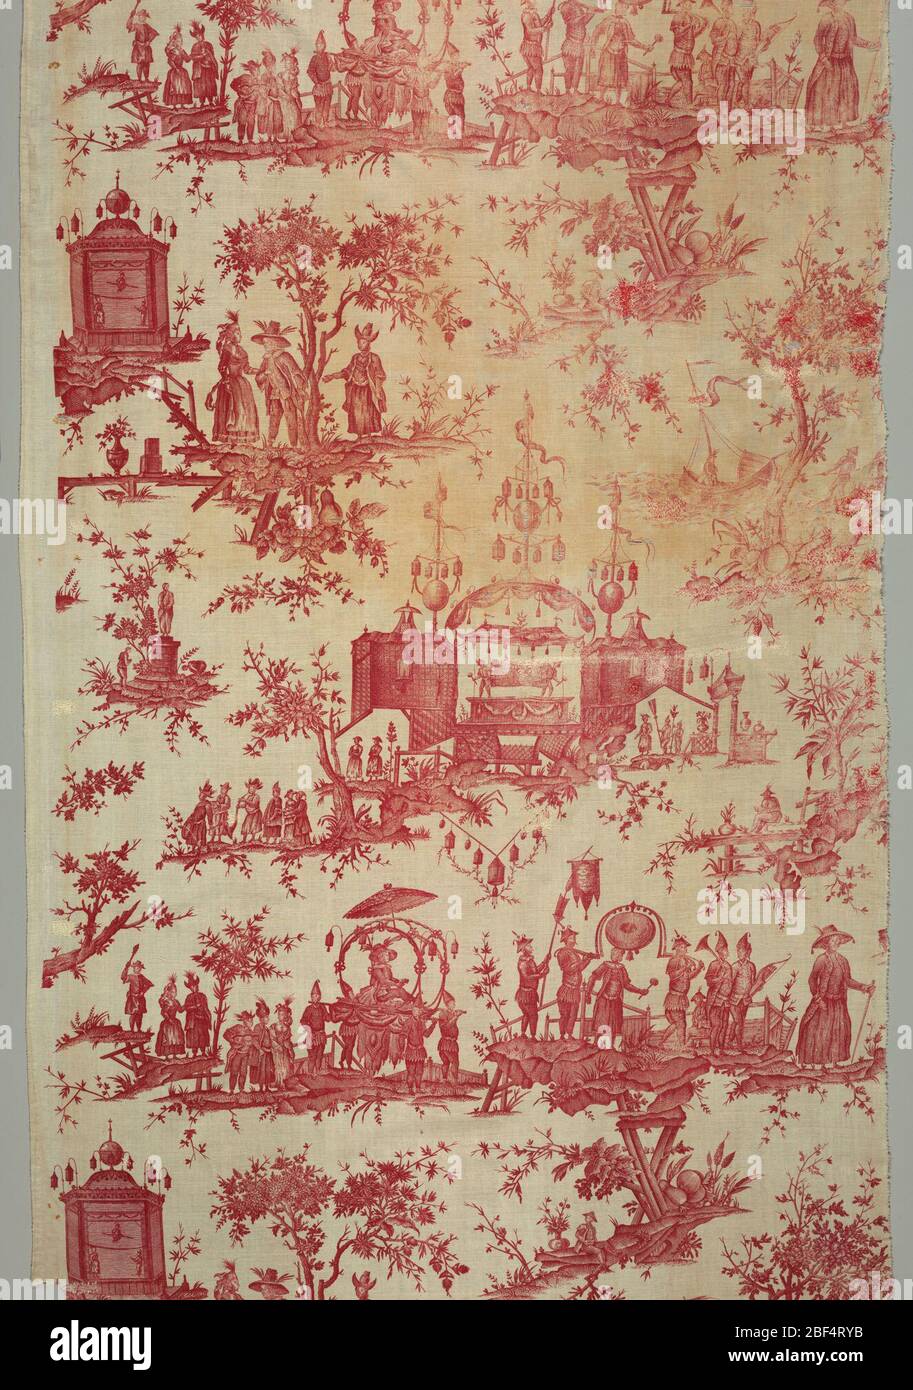 Textile. Two panels of cotton, plain cloth, printed in red, copper plate. Chinoiserie design inspired by an opera by Gretry 'panurge dans l'Isle des Lanternes,' design horizontally arranged shows performers on a stage, processions, etc., personages in fantastic dress. Stock Photo